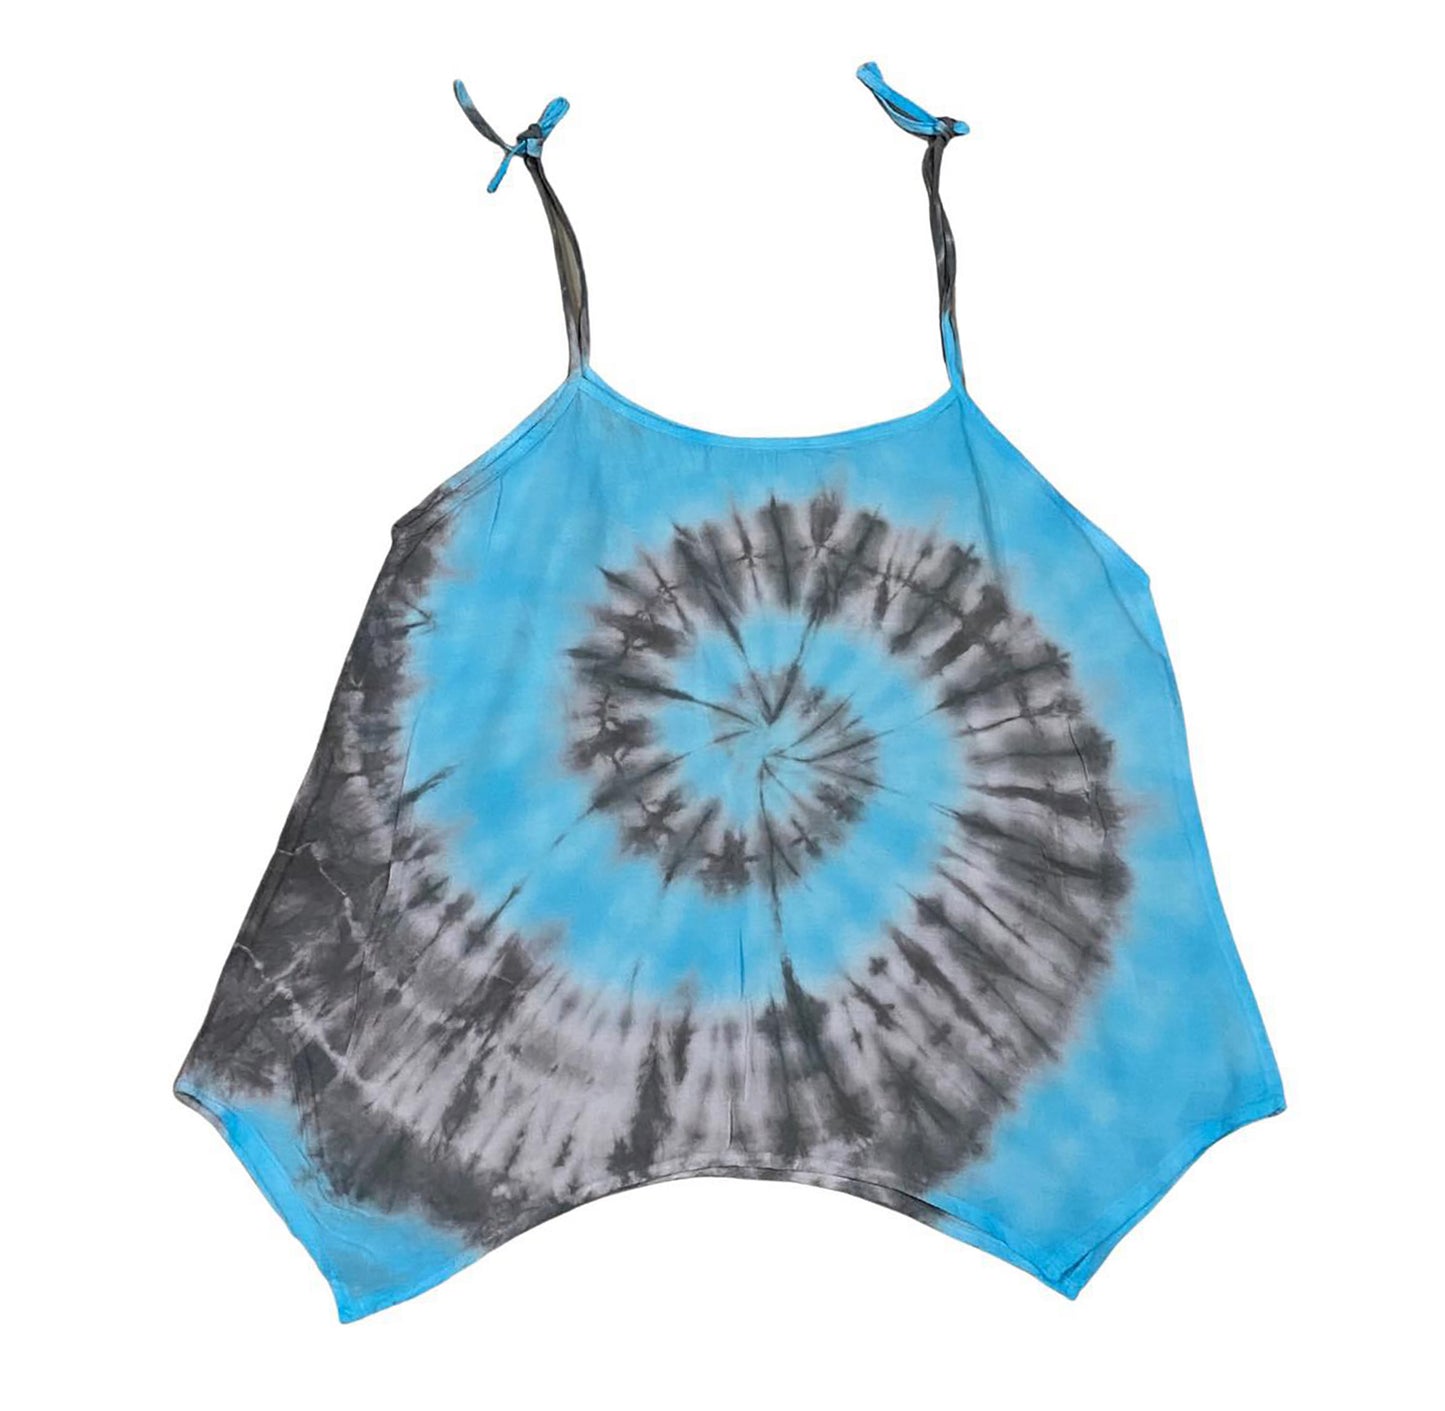 Cami Camisole Teen & Women, One Size Free Size Fit 0 to 8, Handmade Tie Dyed - Blue Seashell